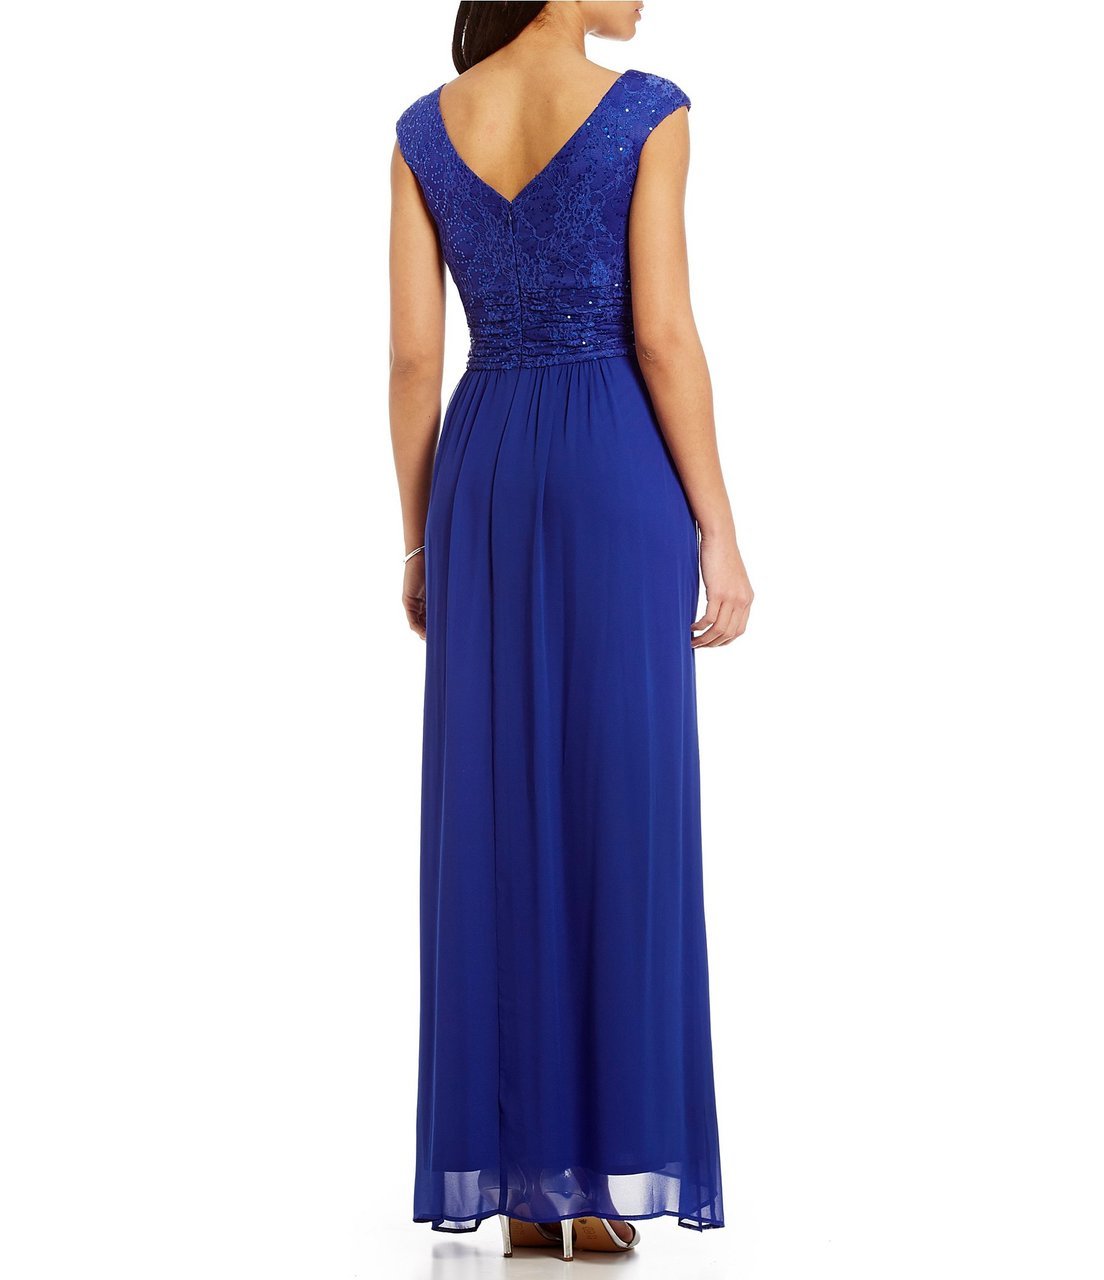 Sangria - ADWKOJ57 Cap Sleeve Sequined Empire Gown in Blue